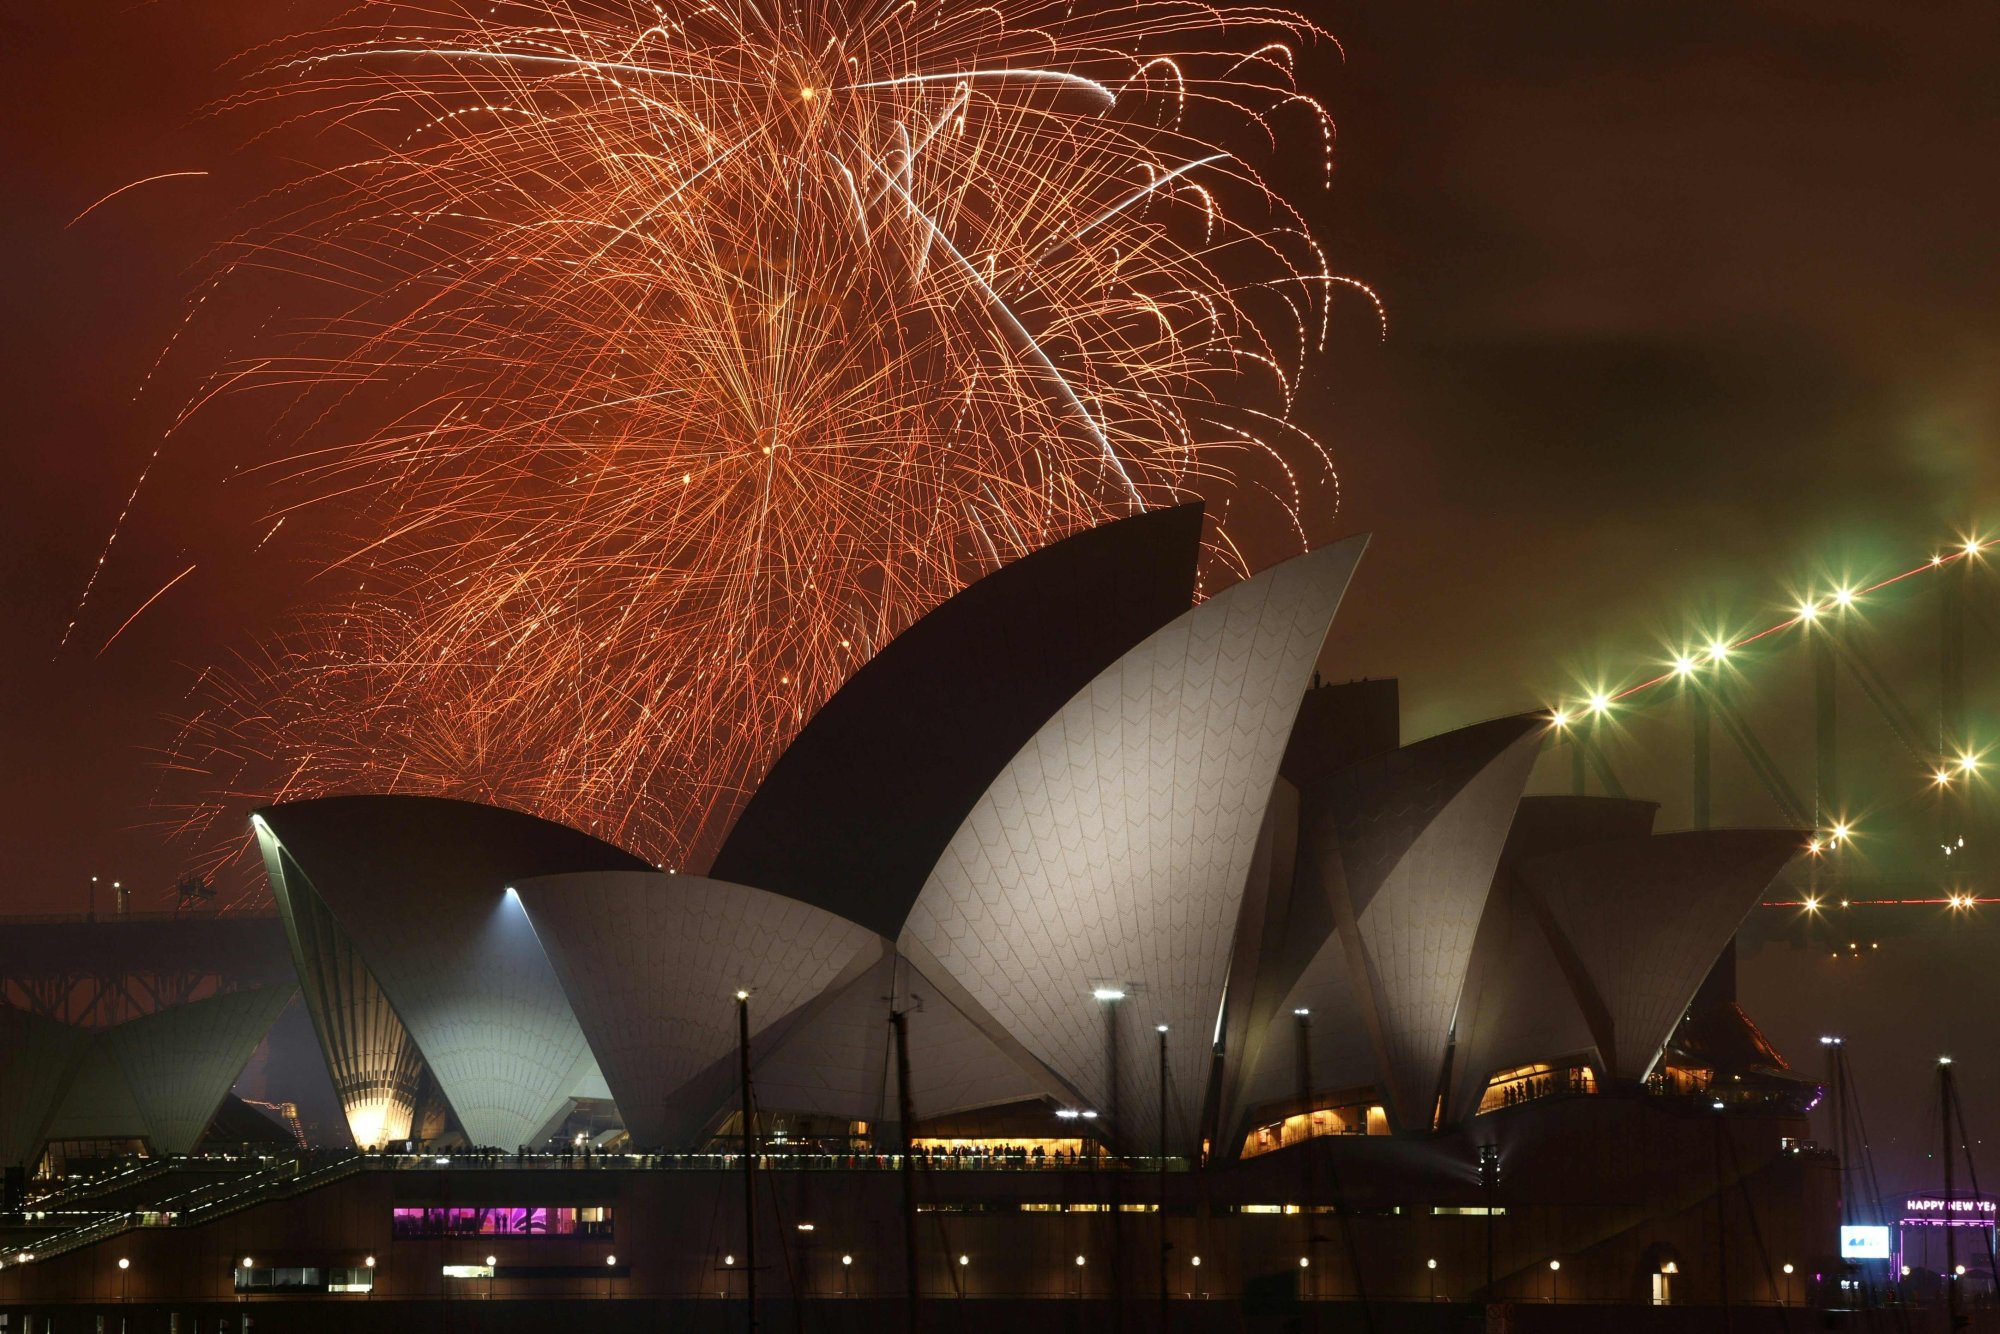 Fireworks fill the sky over the Opera House in Sydney on New Year’s Eve. Photo: AFP